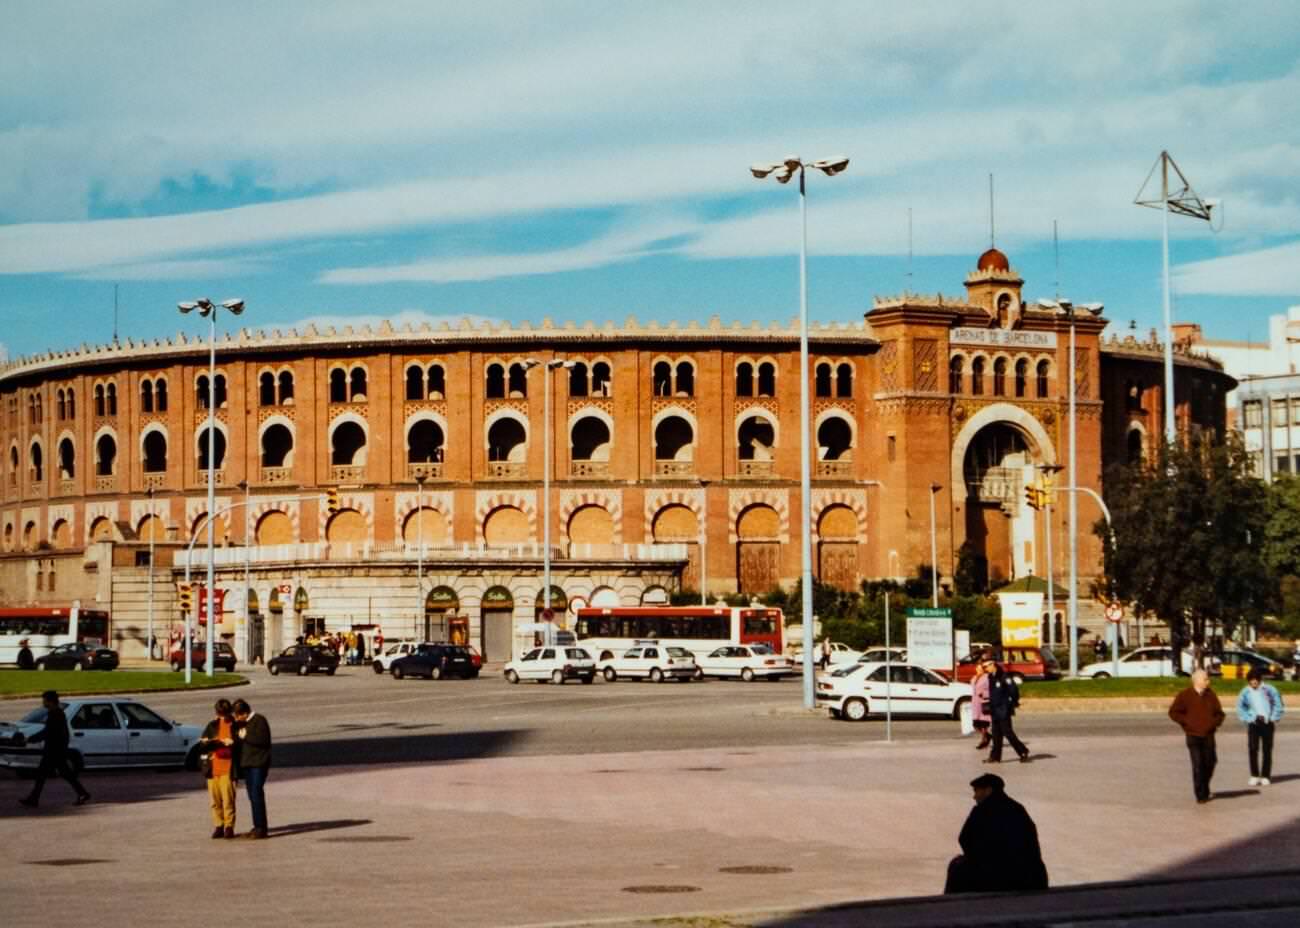 Arenas de Barcelona, the old bullring turned shopping venue and tourist attraction, Barcelona, Catalonia, Spain, 1997.